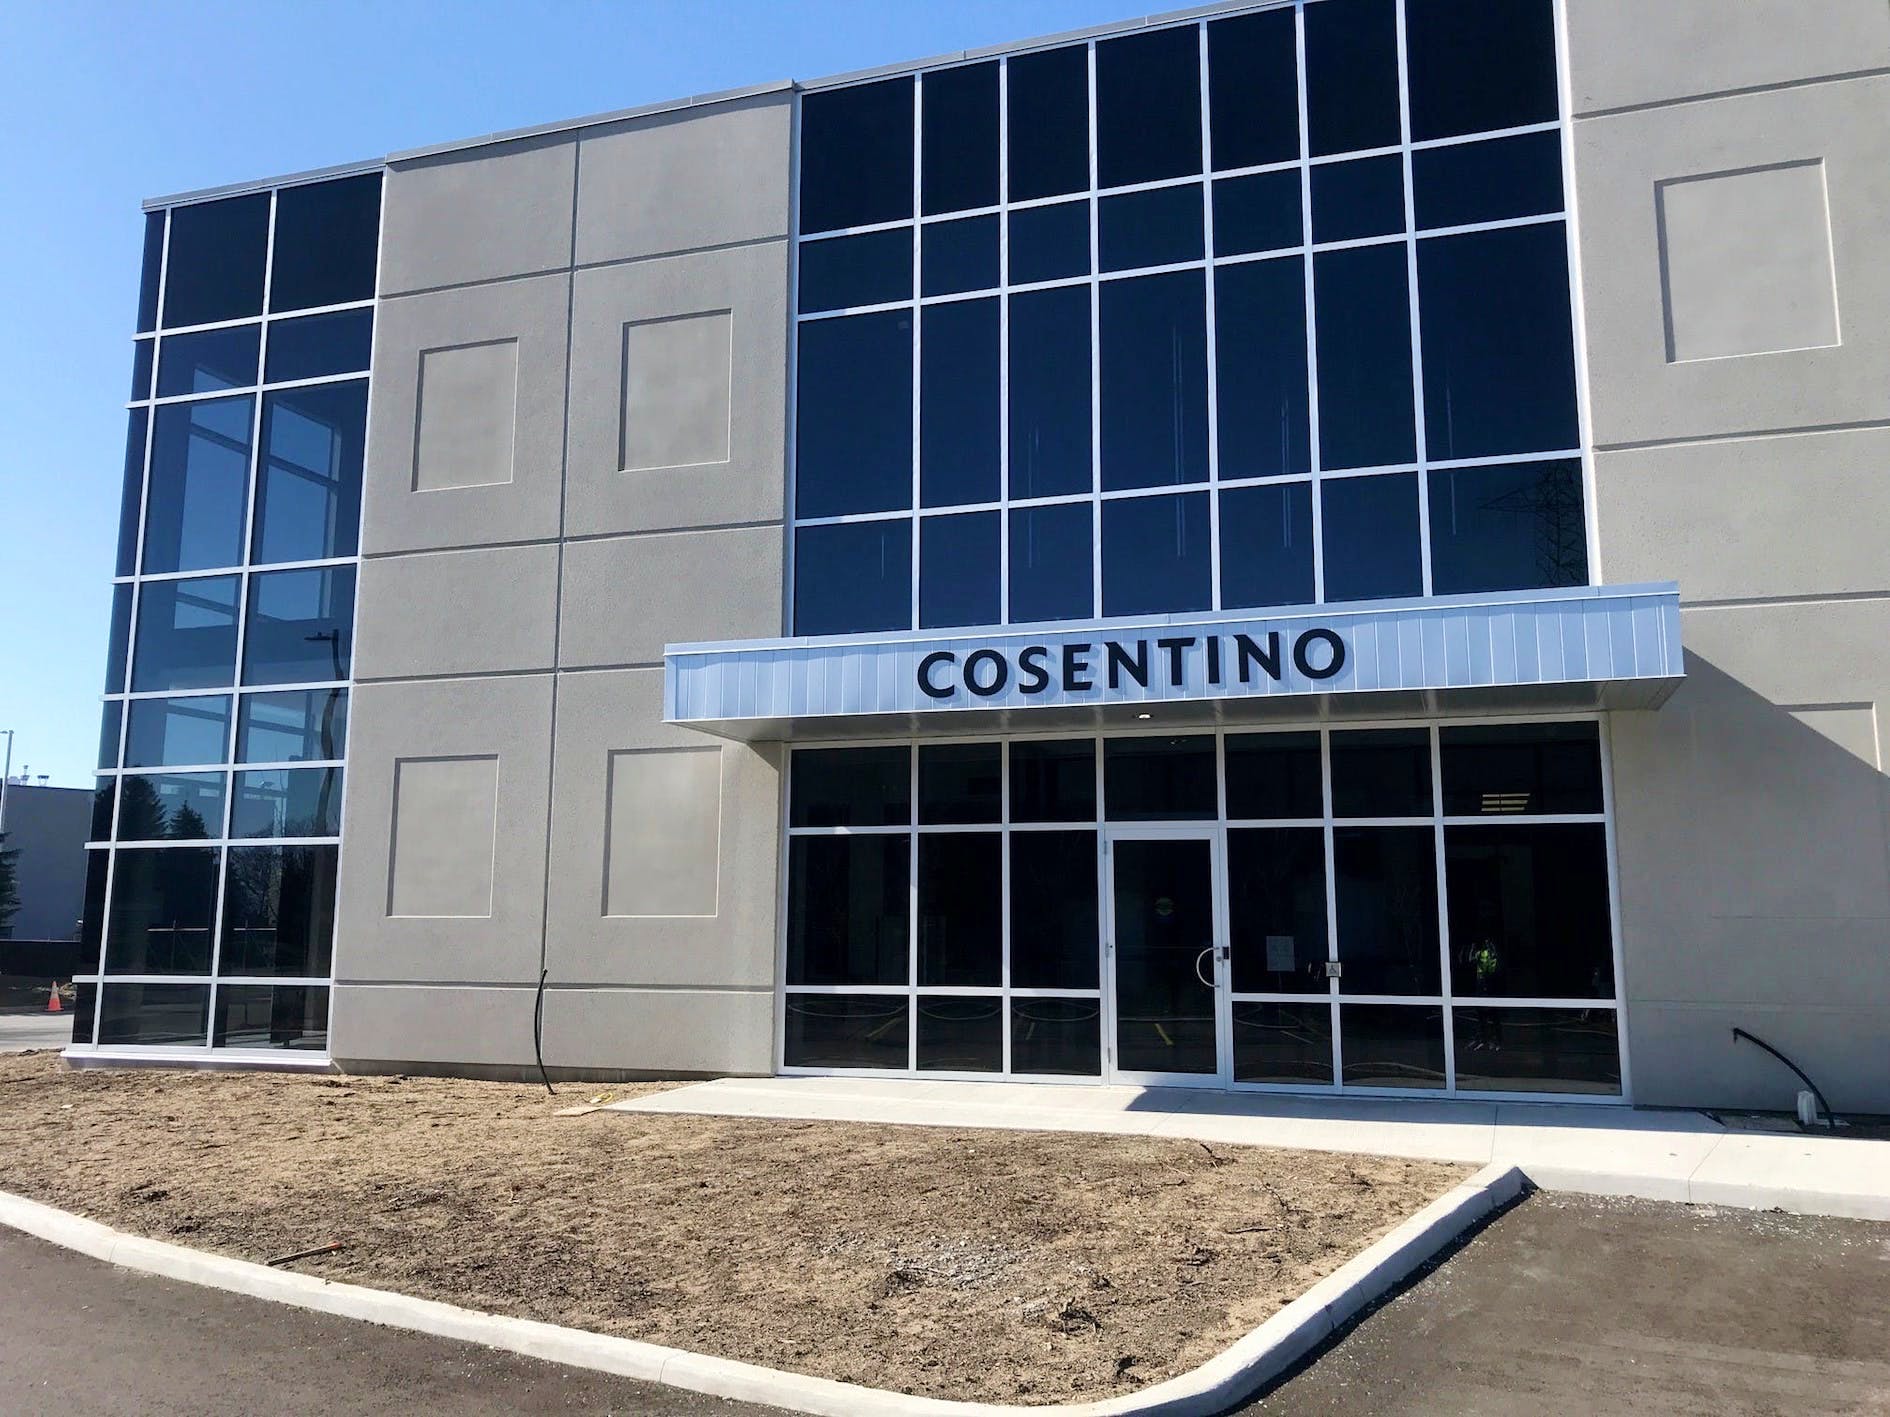 Image of Cosentino Center Ottawa 6 in Cosentino boosts its presence in Mexico with spectacular new facilities - Cosentino